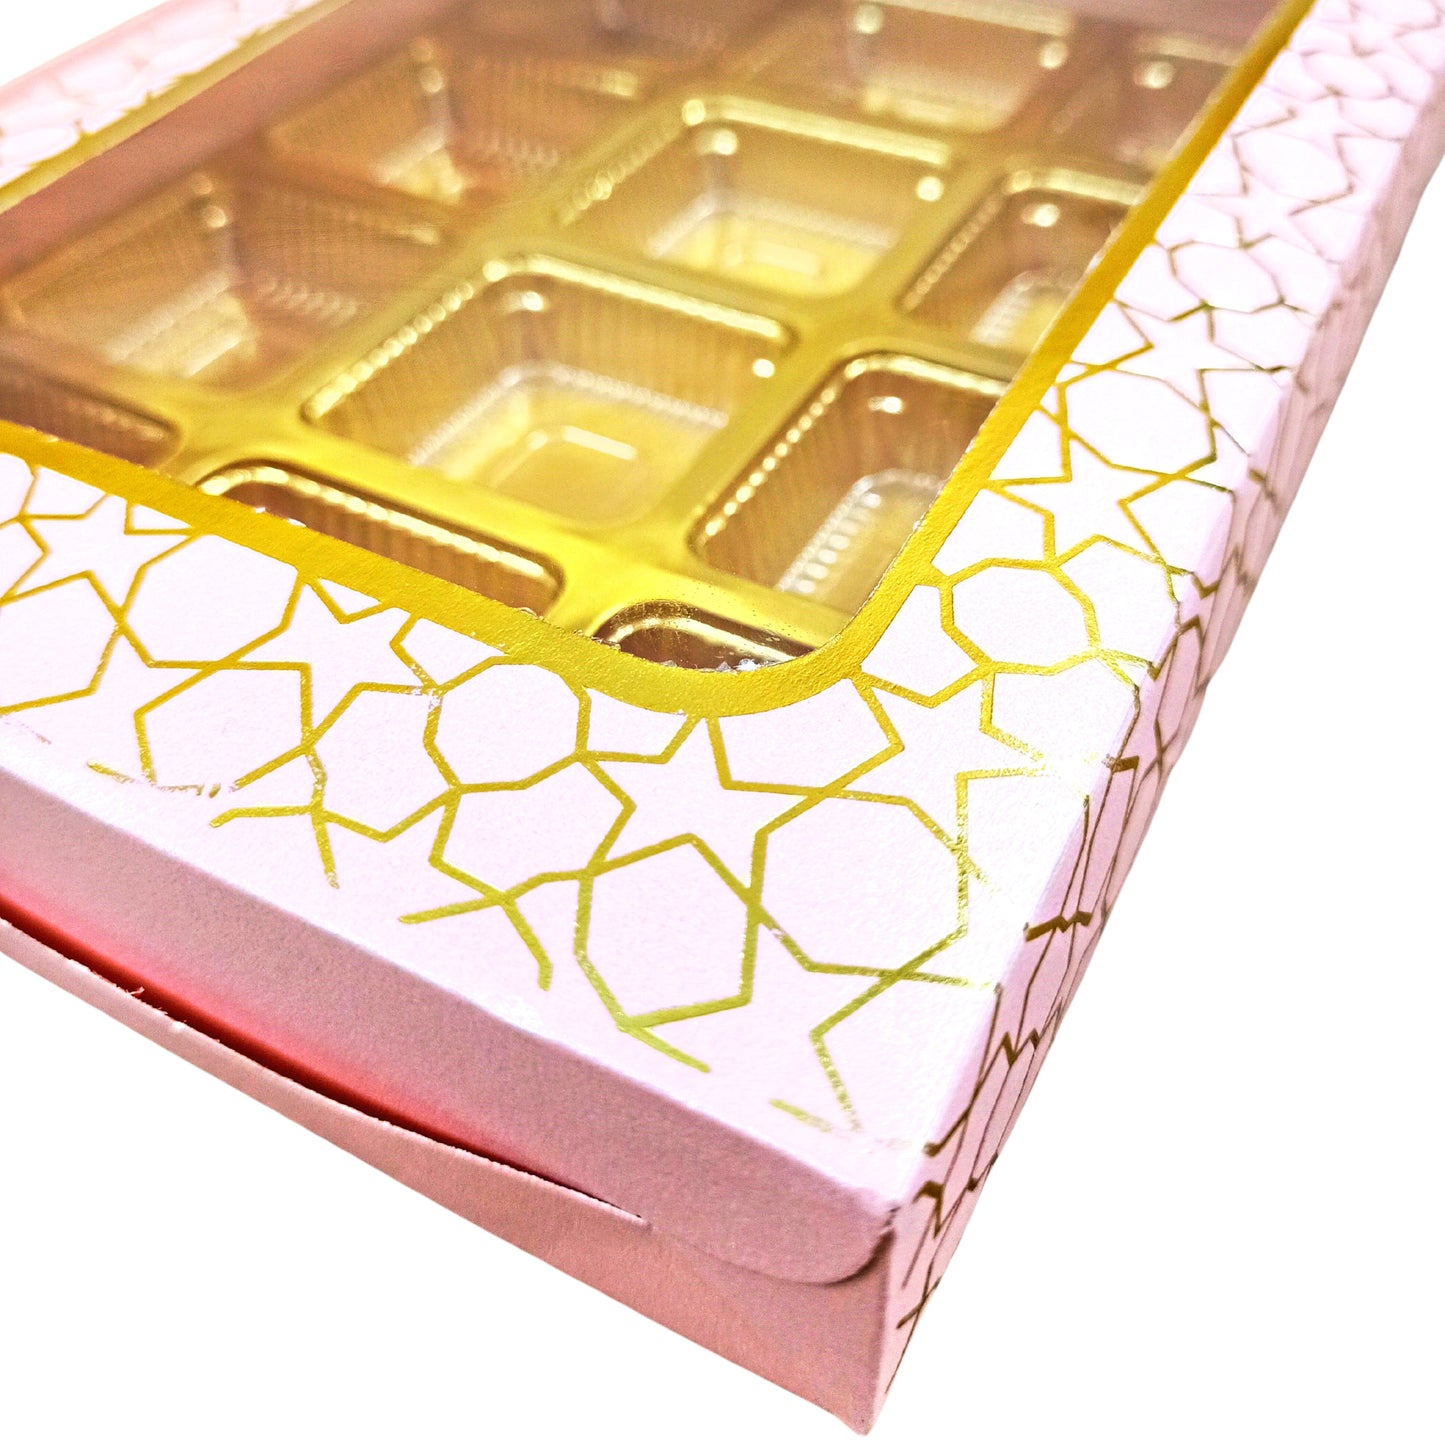 12 Cavity Chocolate Boxes I 7.5 x 5.5 x 1.25 inches I Pink Hexa Golden Foiling I For Valentine, Rakhi, Return Gifts Royal Box Shop